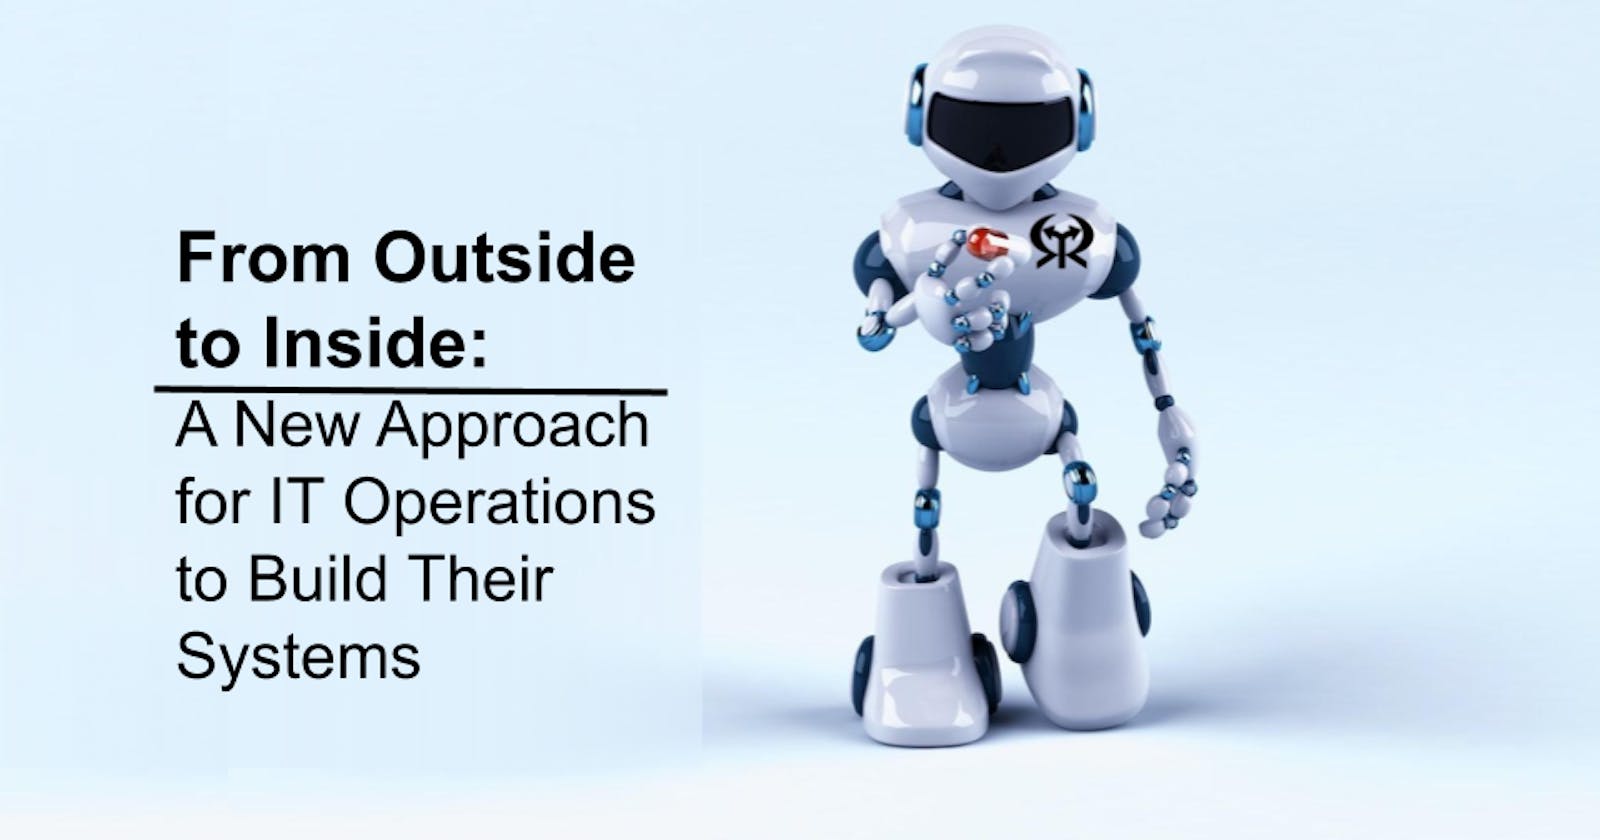 From Outside to Inside: A New Approach for IT Operations to Build Their System